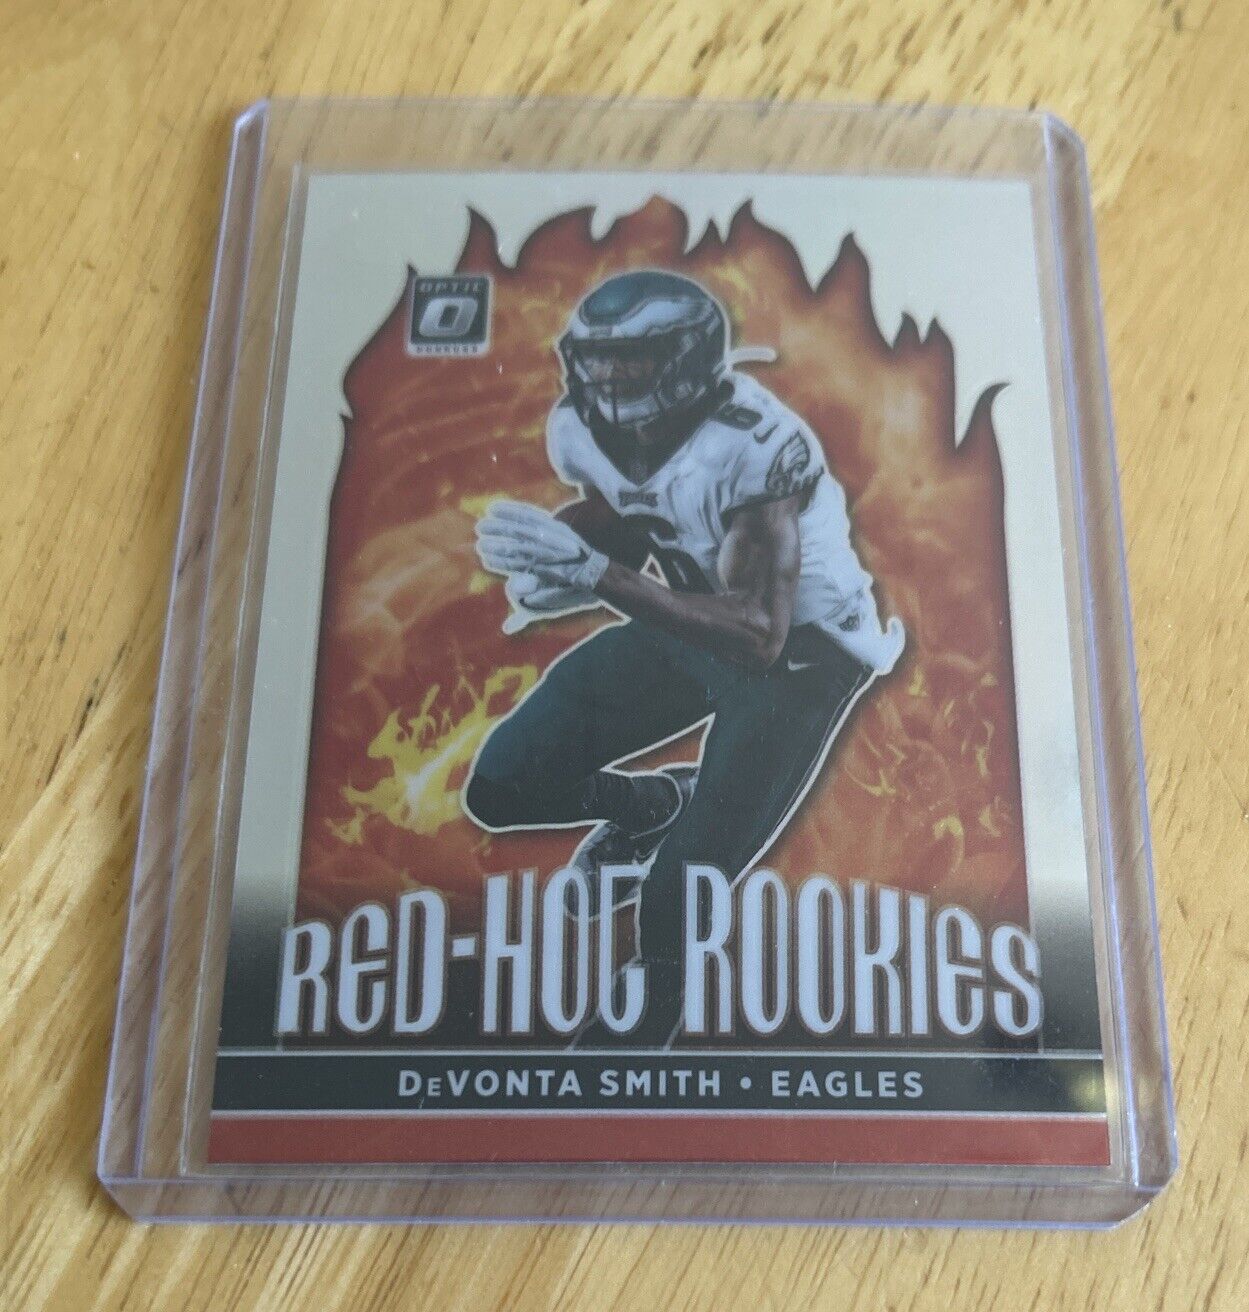 DeVonta Smith 2021 Donruss Optic Red Hot Rookies Insert Rookie Card Eagles